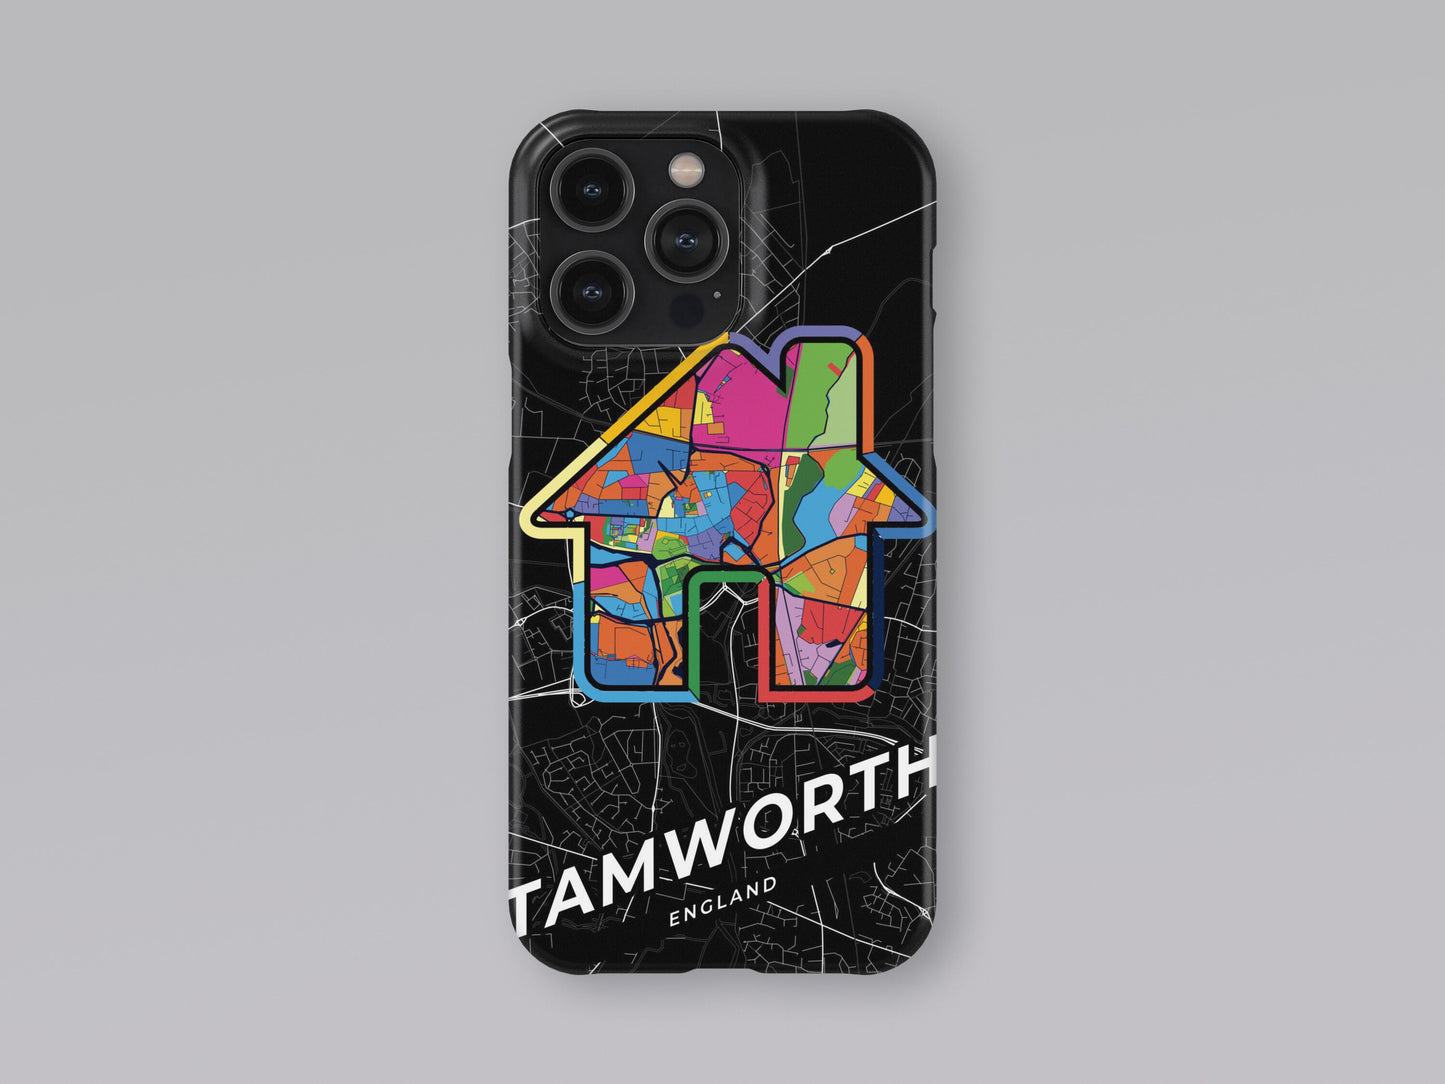 Tamworth England slim phone case with colorful icon 3